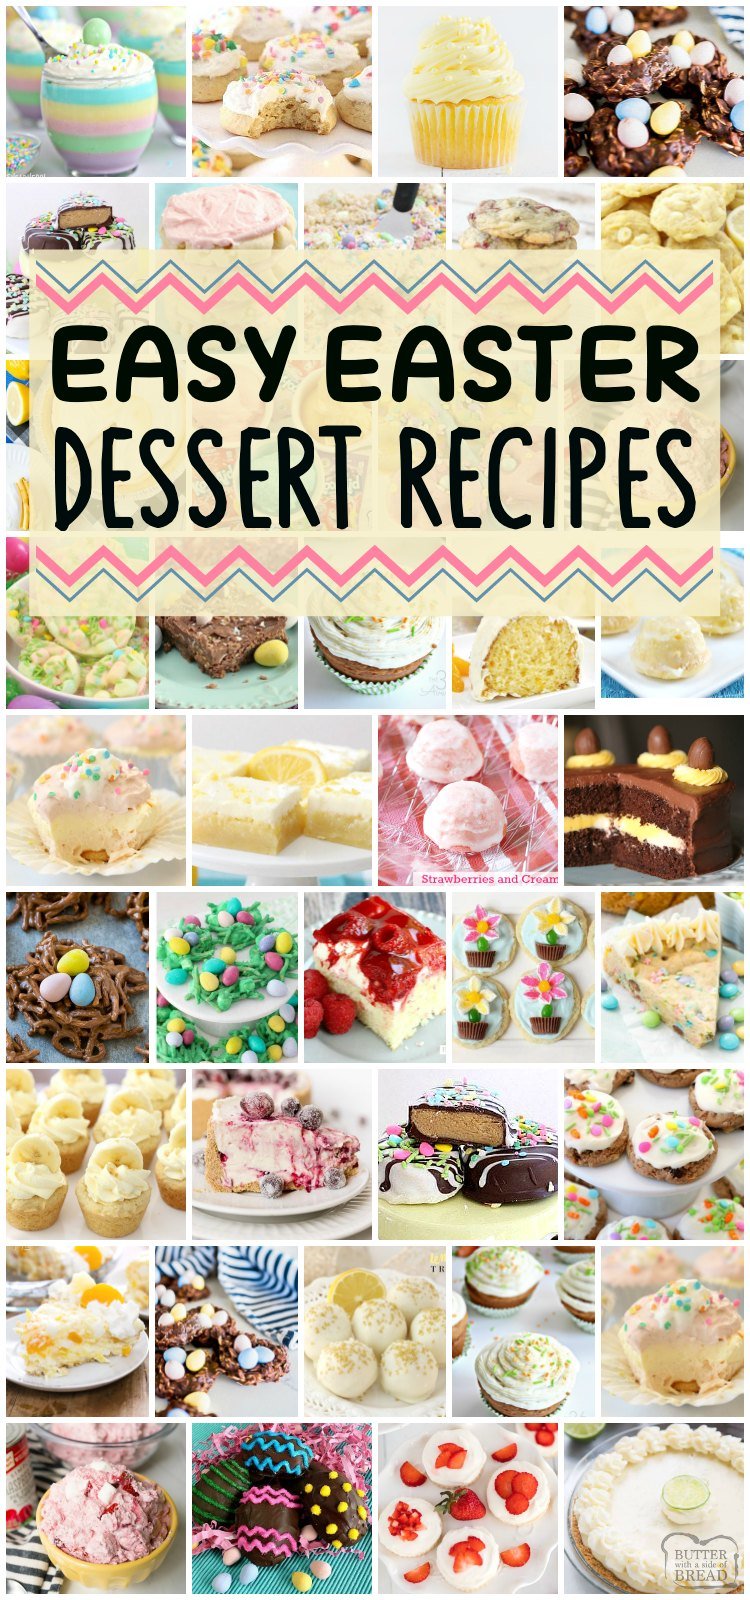 Easy Easter Desserts that everyone will enjoy! All these favorite Easter recipes, from the Peanut Butter Easter Eggs to the Little Lemon Drops, are some of our favorite treats for this special holiday! #Easter #dessert #easyEaster #pastel #candy #treats #easyrecipes from BUTTER WITH A SIDE OF BREAD